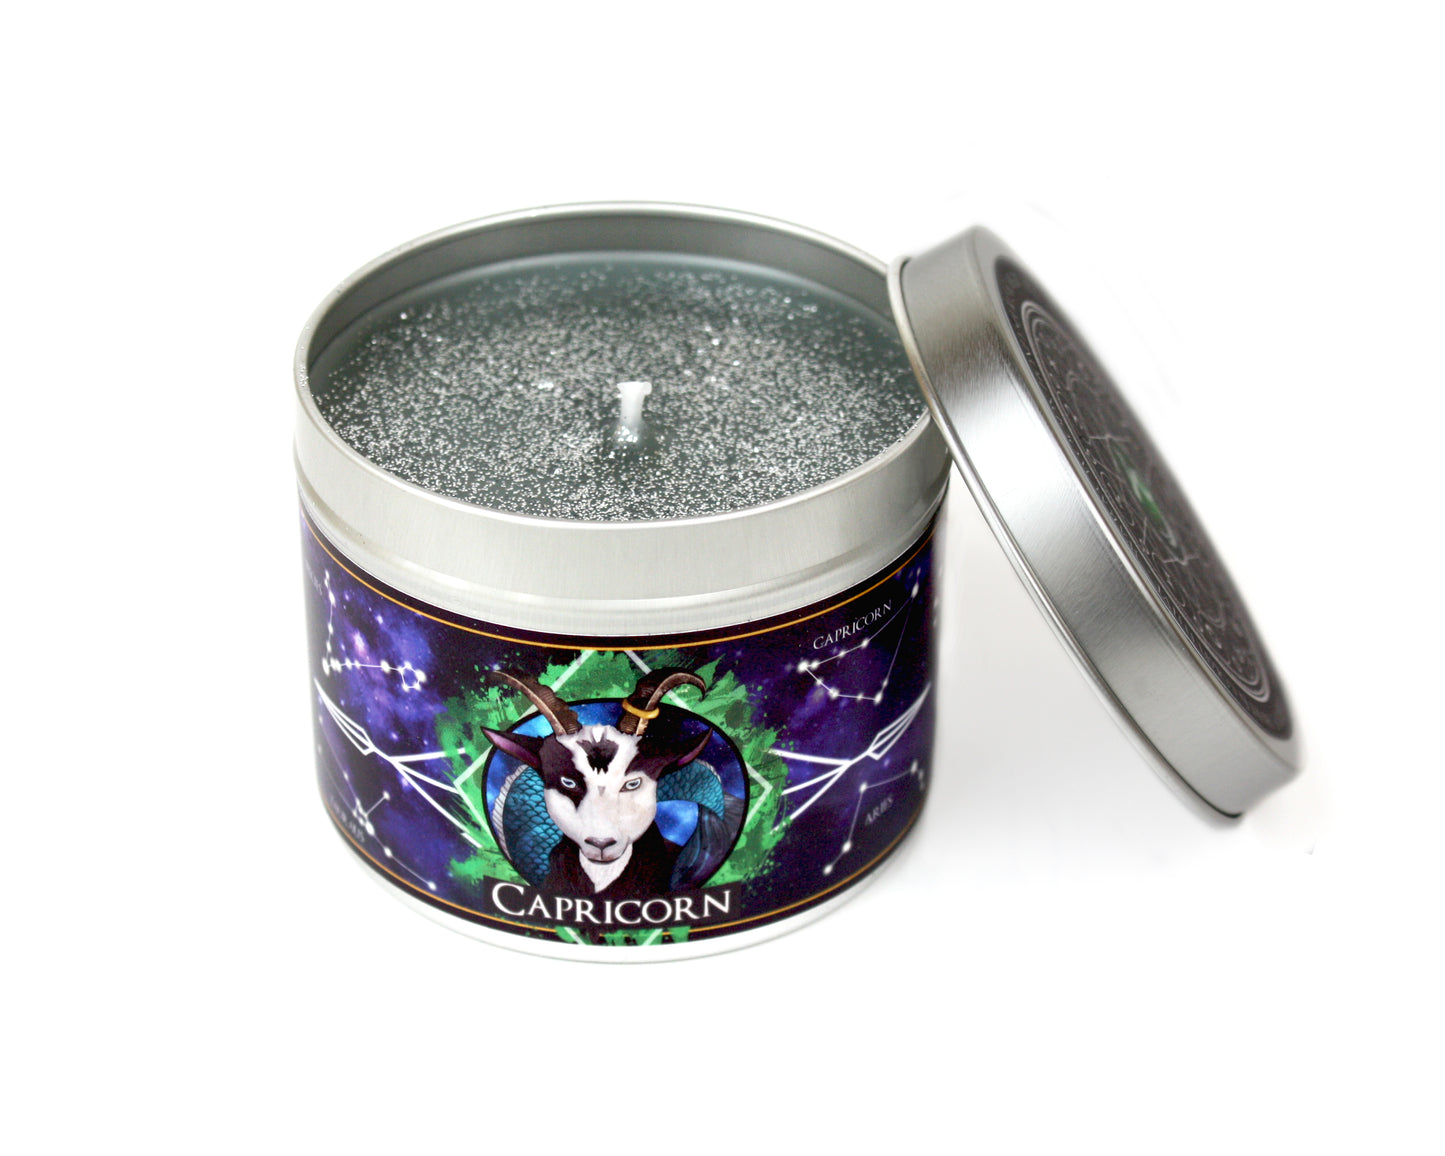 Capricorn zodiac horoscope candle with lid off and grey wax